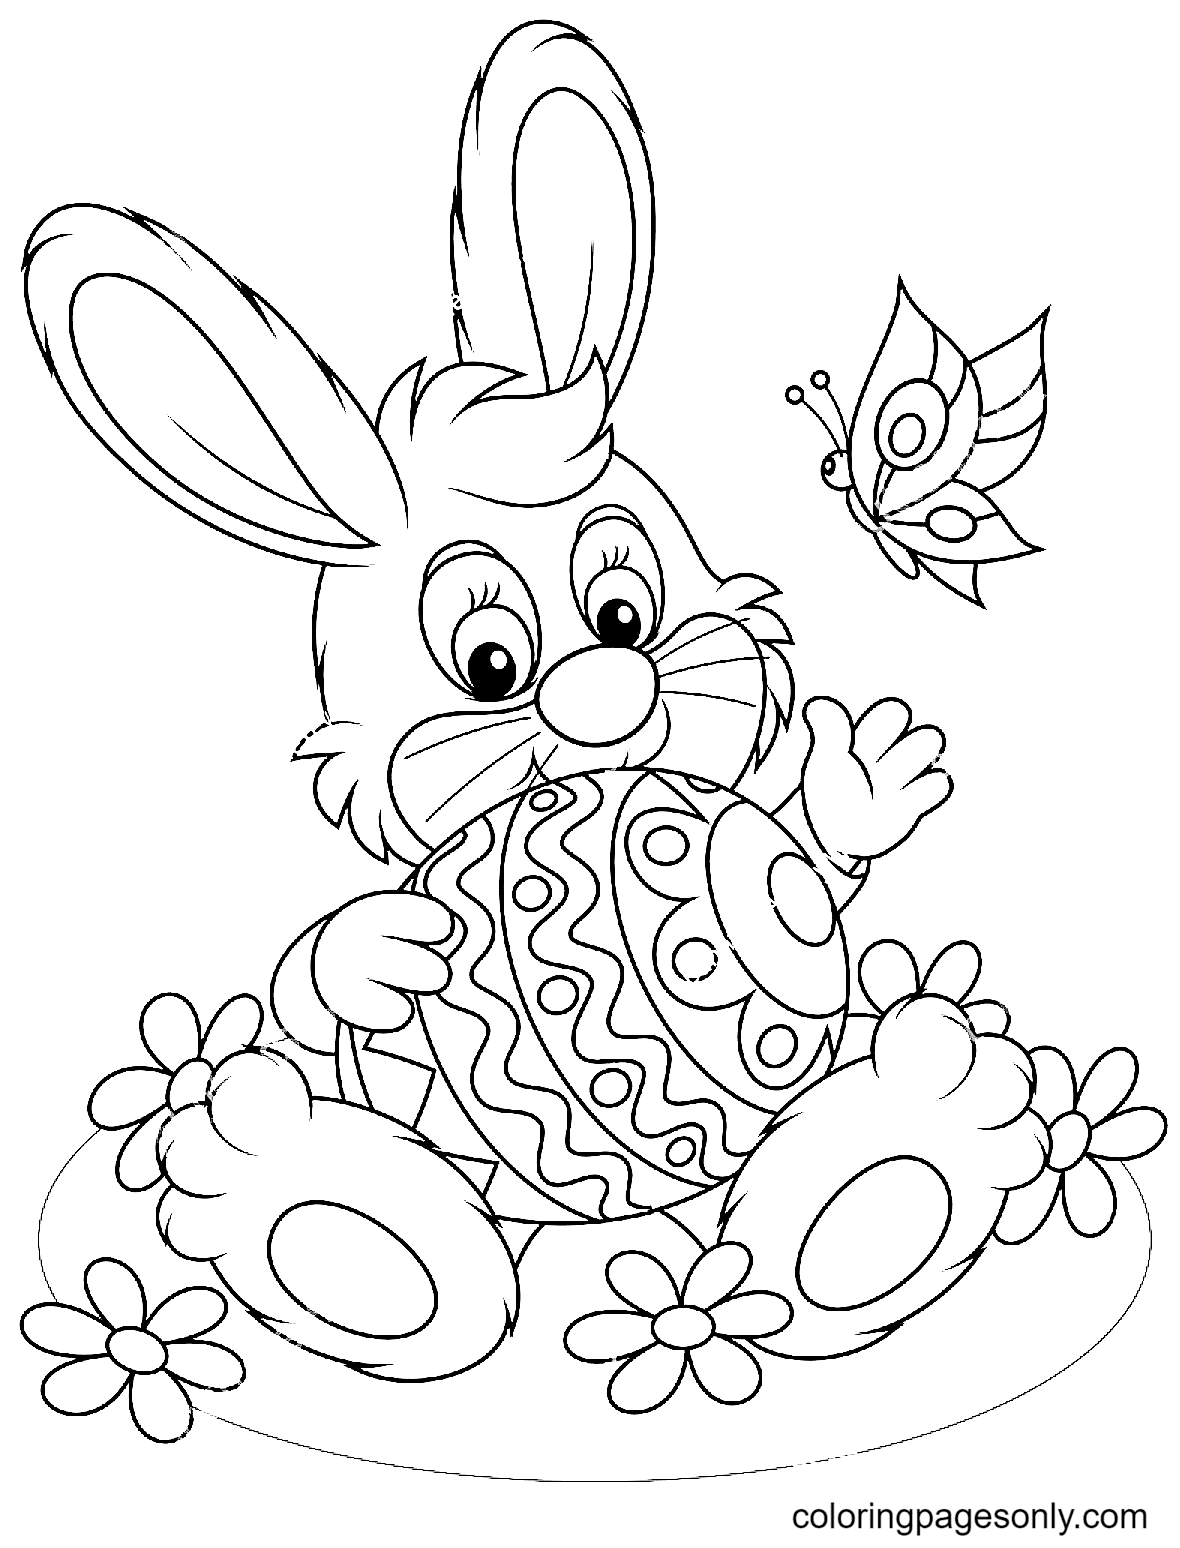 Bunny with Butterflies Coloring Page